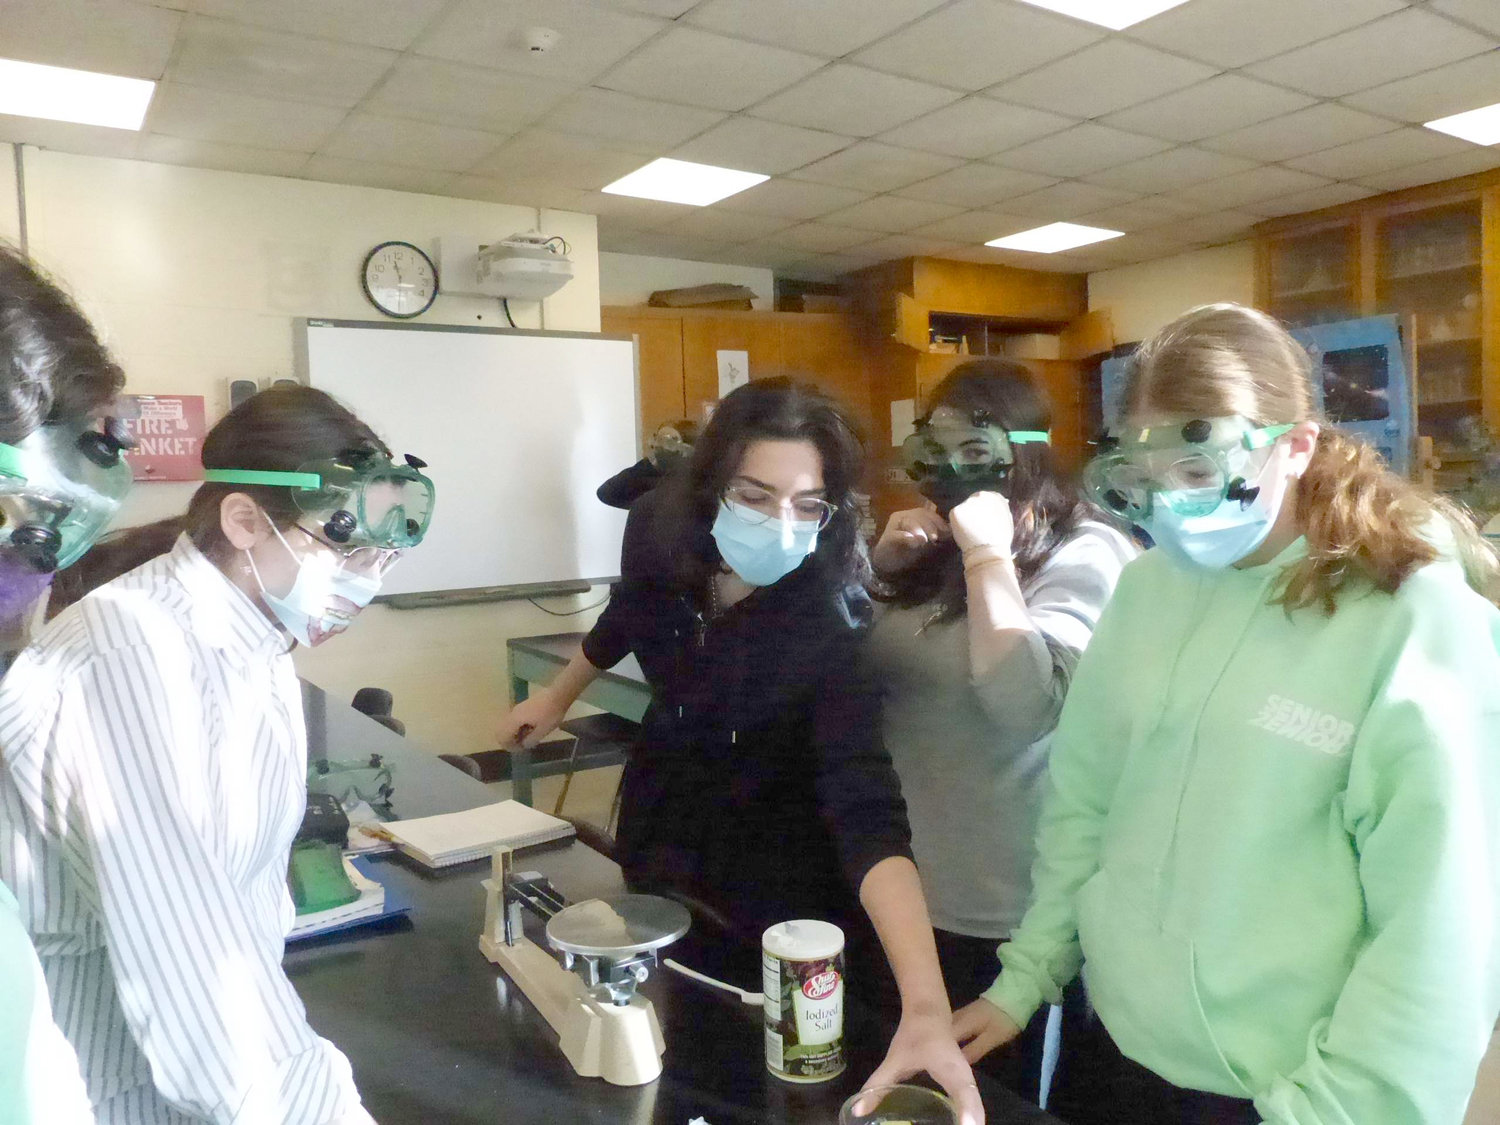 New England Academy of Torah Seniors experiment in the school’s science lab.